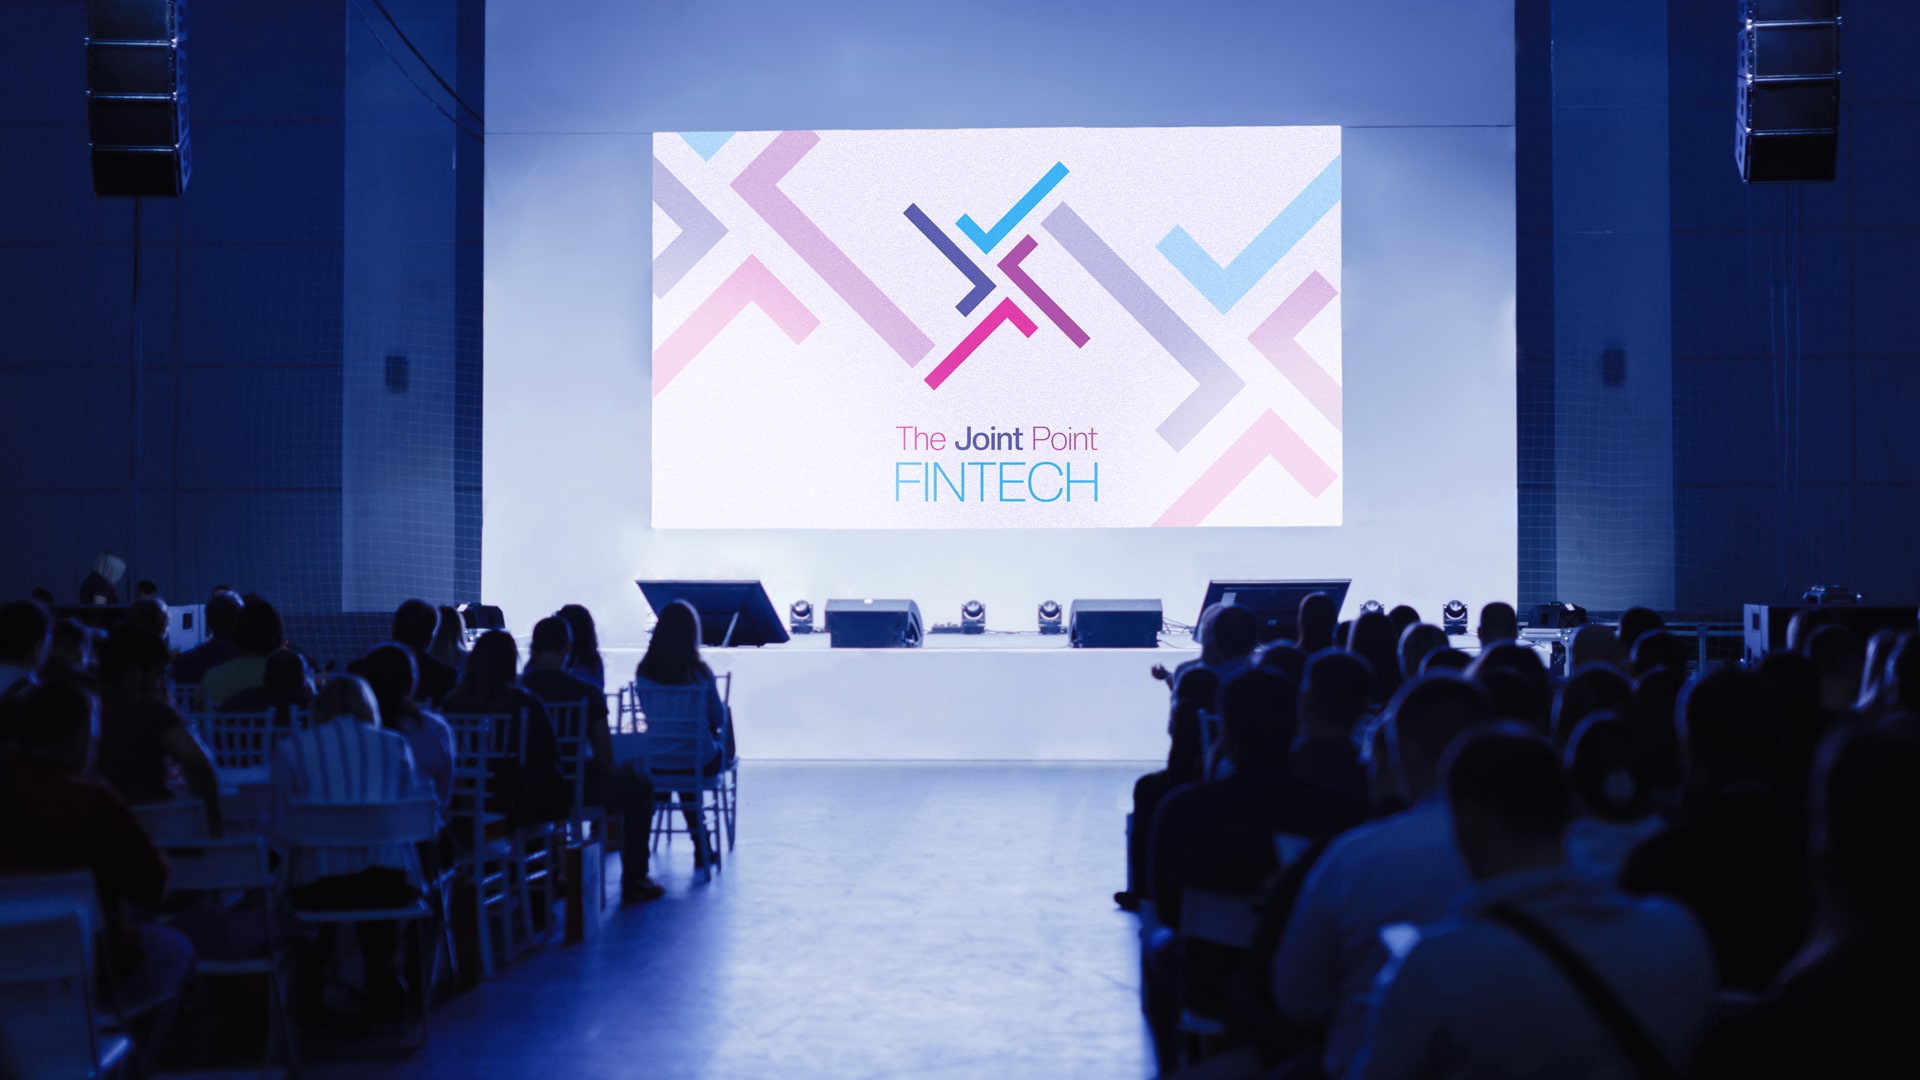 SOFTin Space, the Biggest FINTECH conference in Middle East